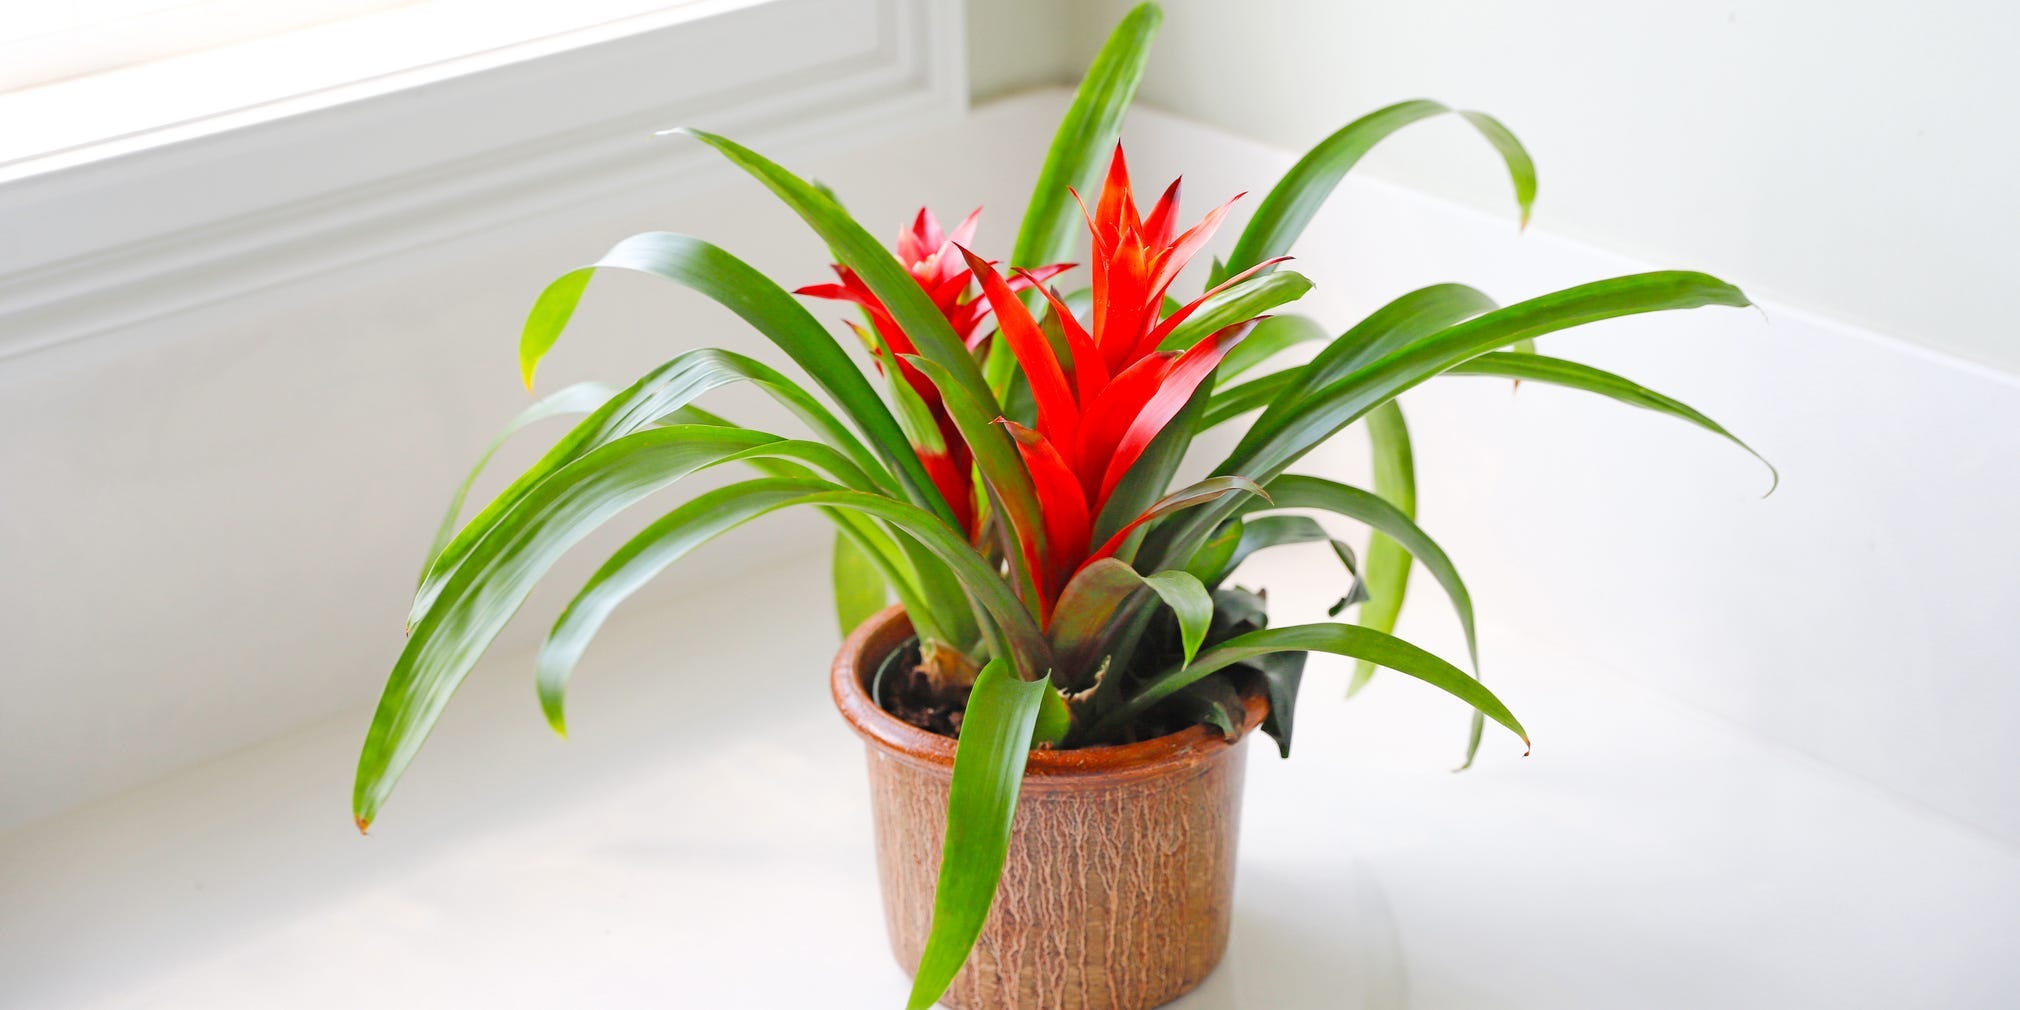 A red bromeliad plant in a pot on a ledge in front of a window.